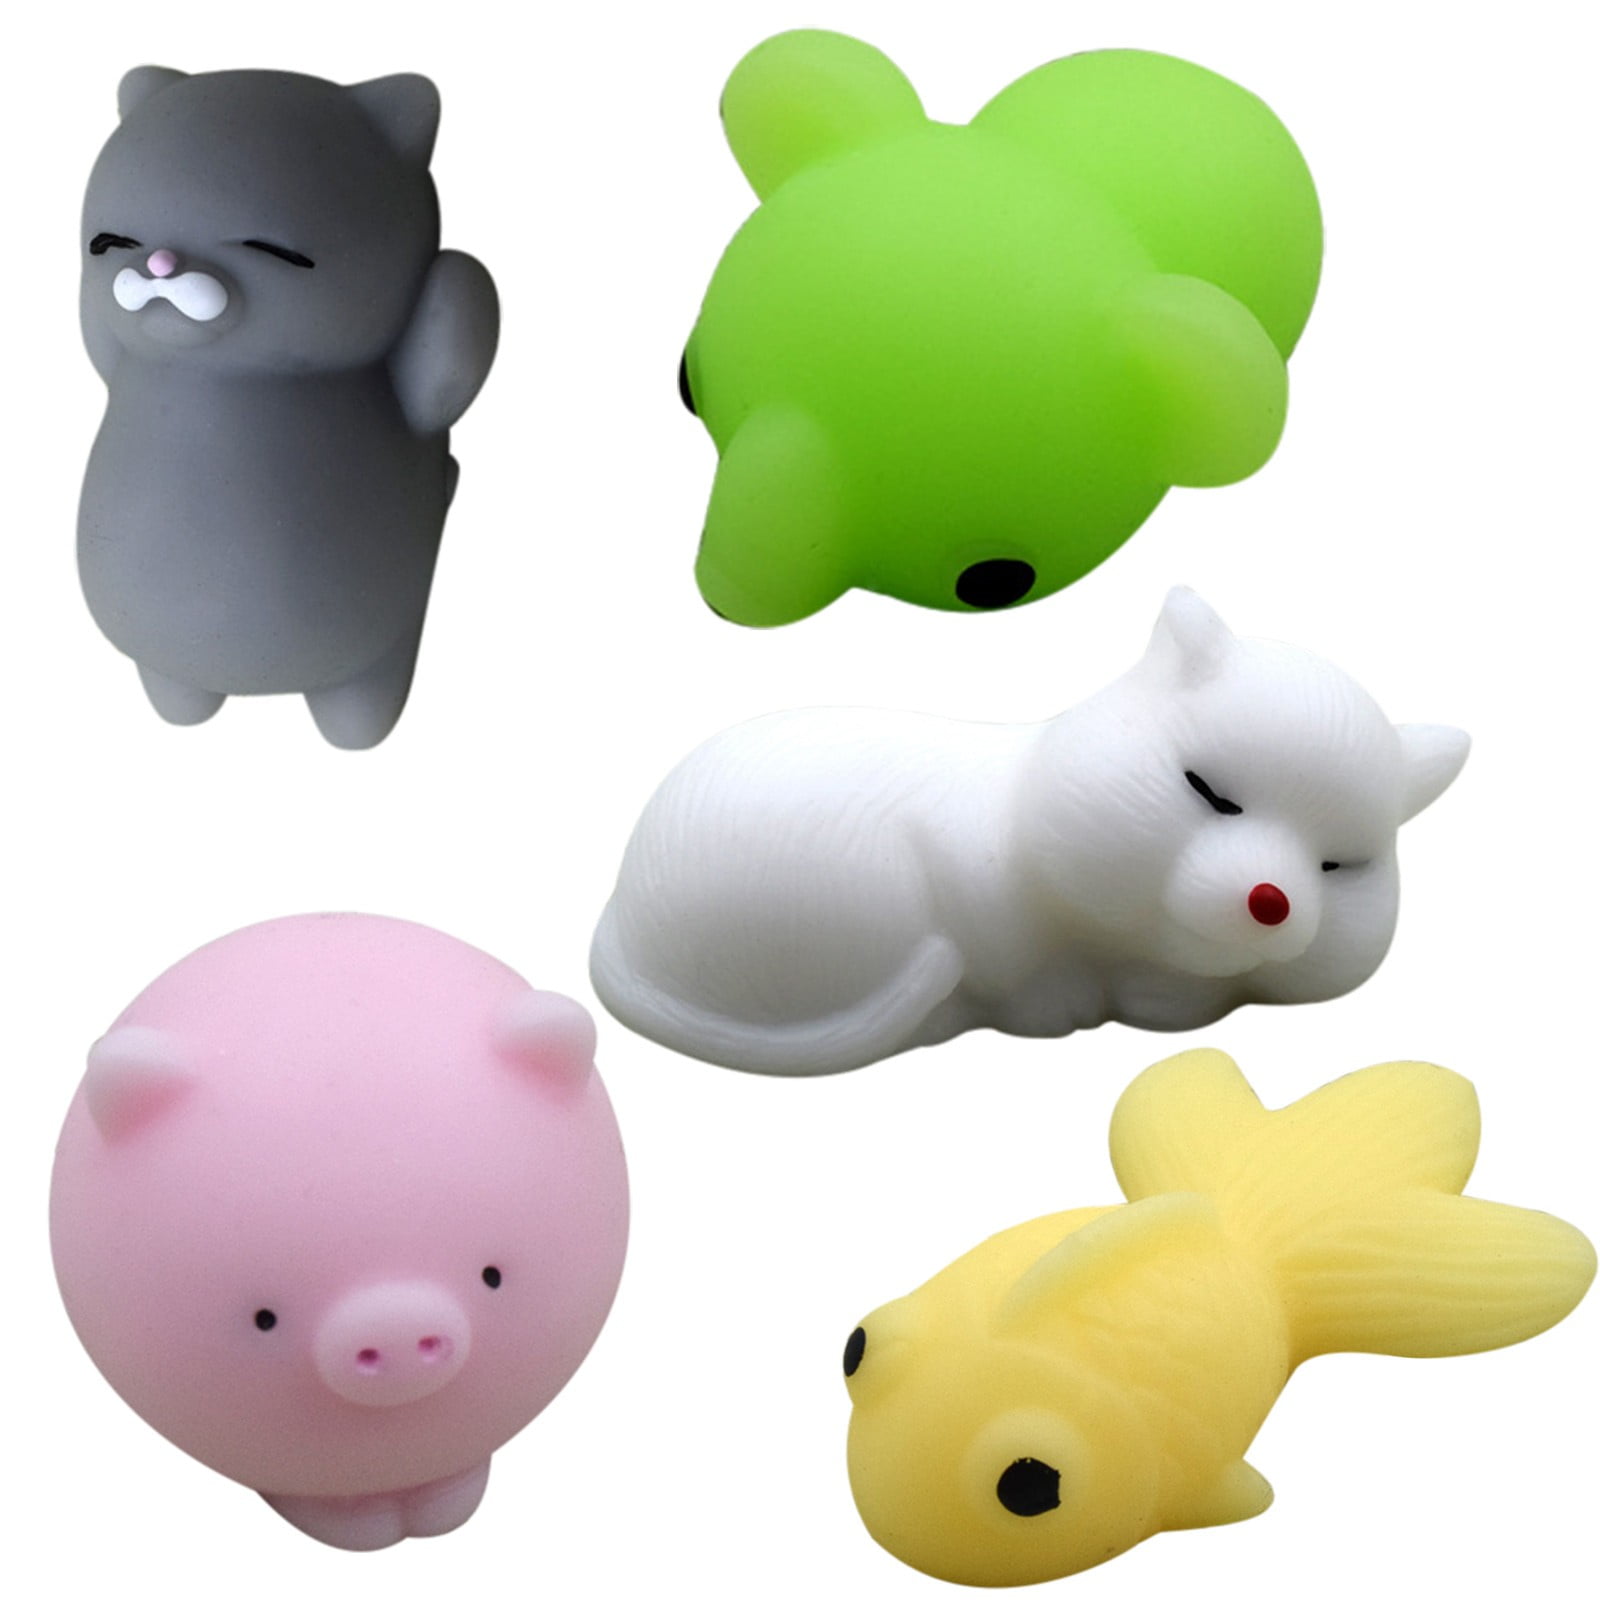 Anti-Anxiety Squeeze & Fidget Toy for Kids & Adults Super Slow Rising Relaxing Juesi Toys Stress Relief Squishy Kawaii Panda Ice Cream Design Soft 